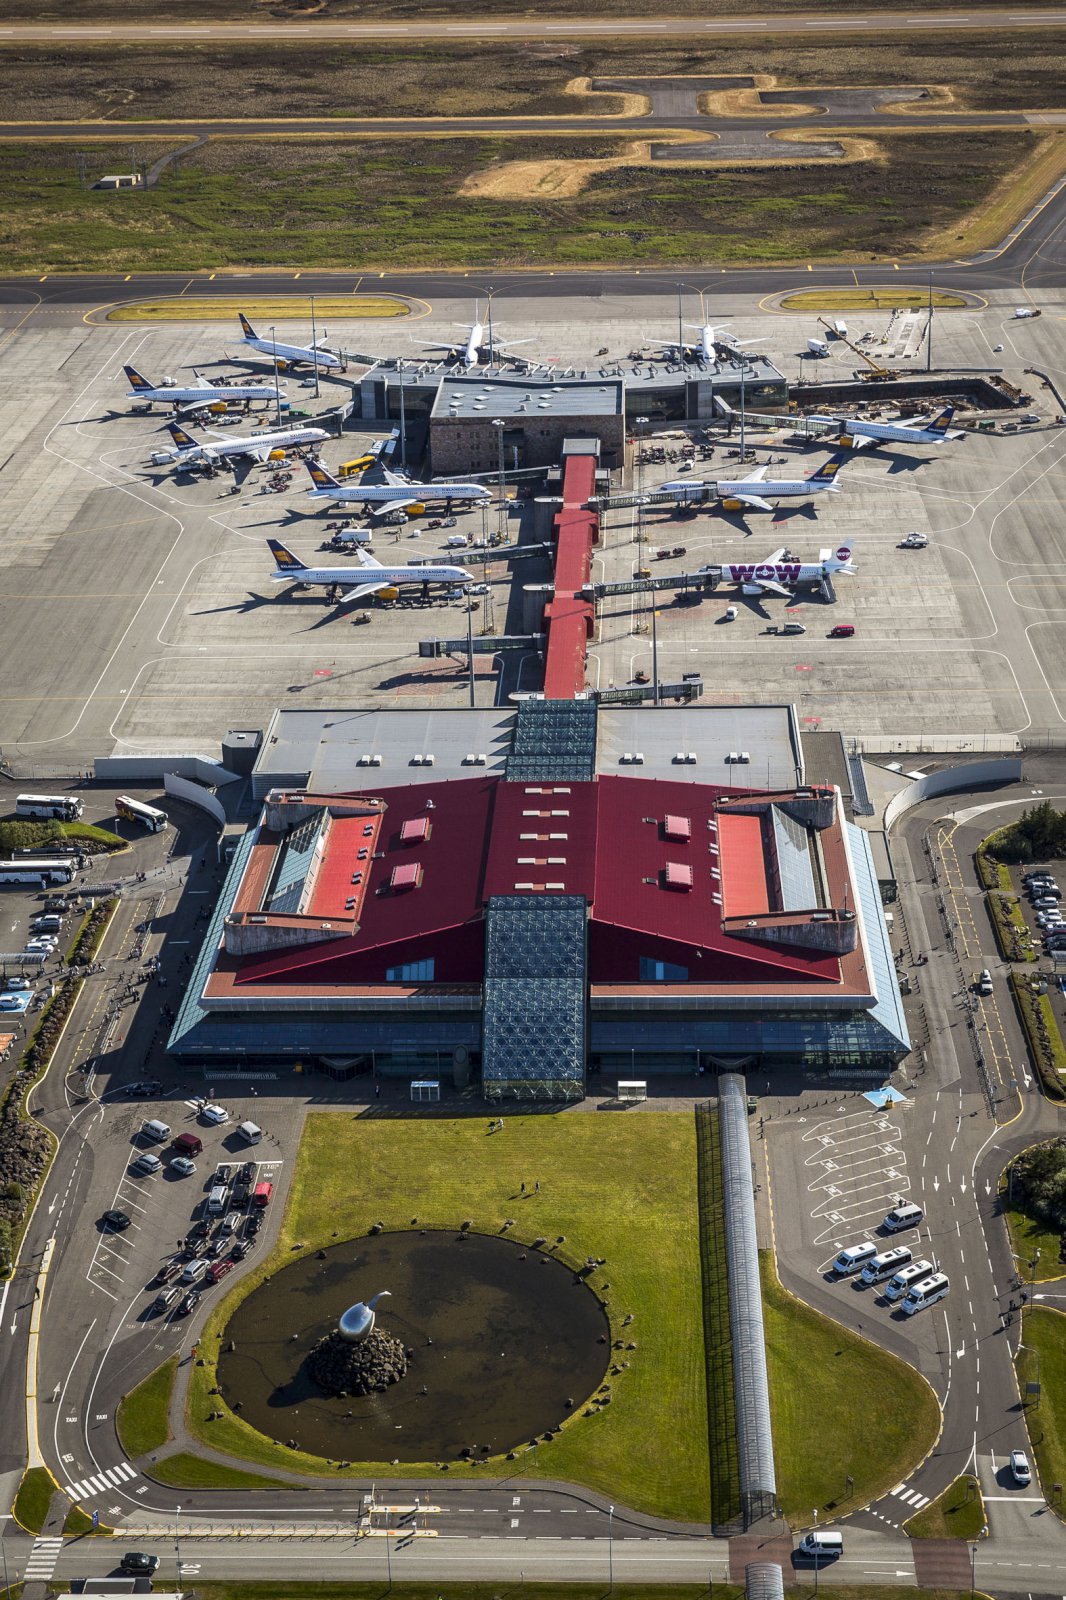 Traffic at Keflavik International Airport continues to rise